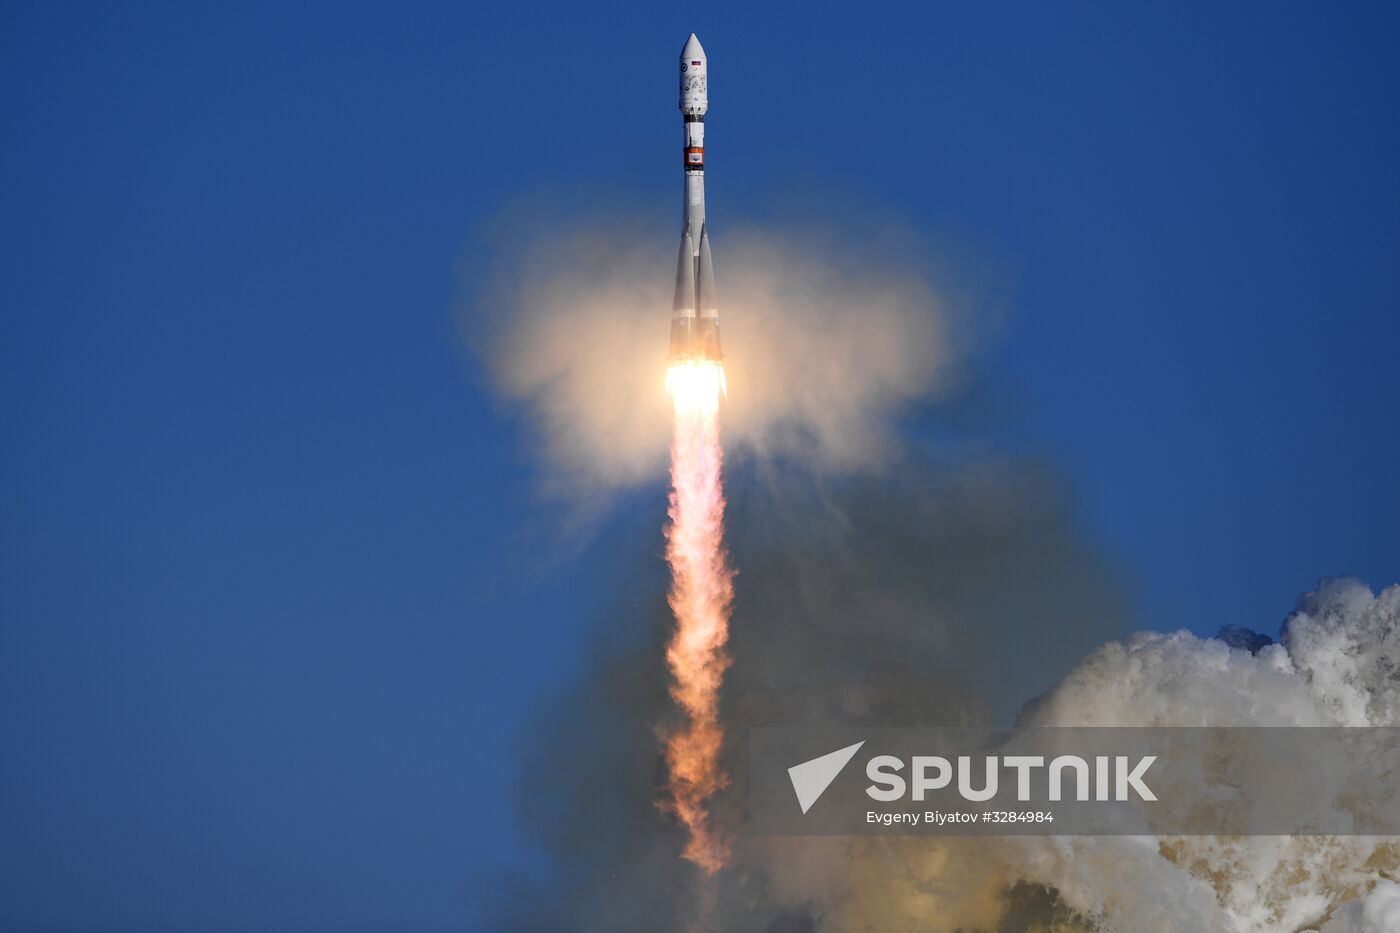 Soyuz-2.1a launches from Vostochny Space Center